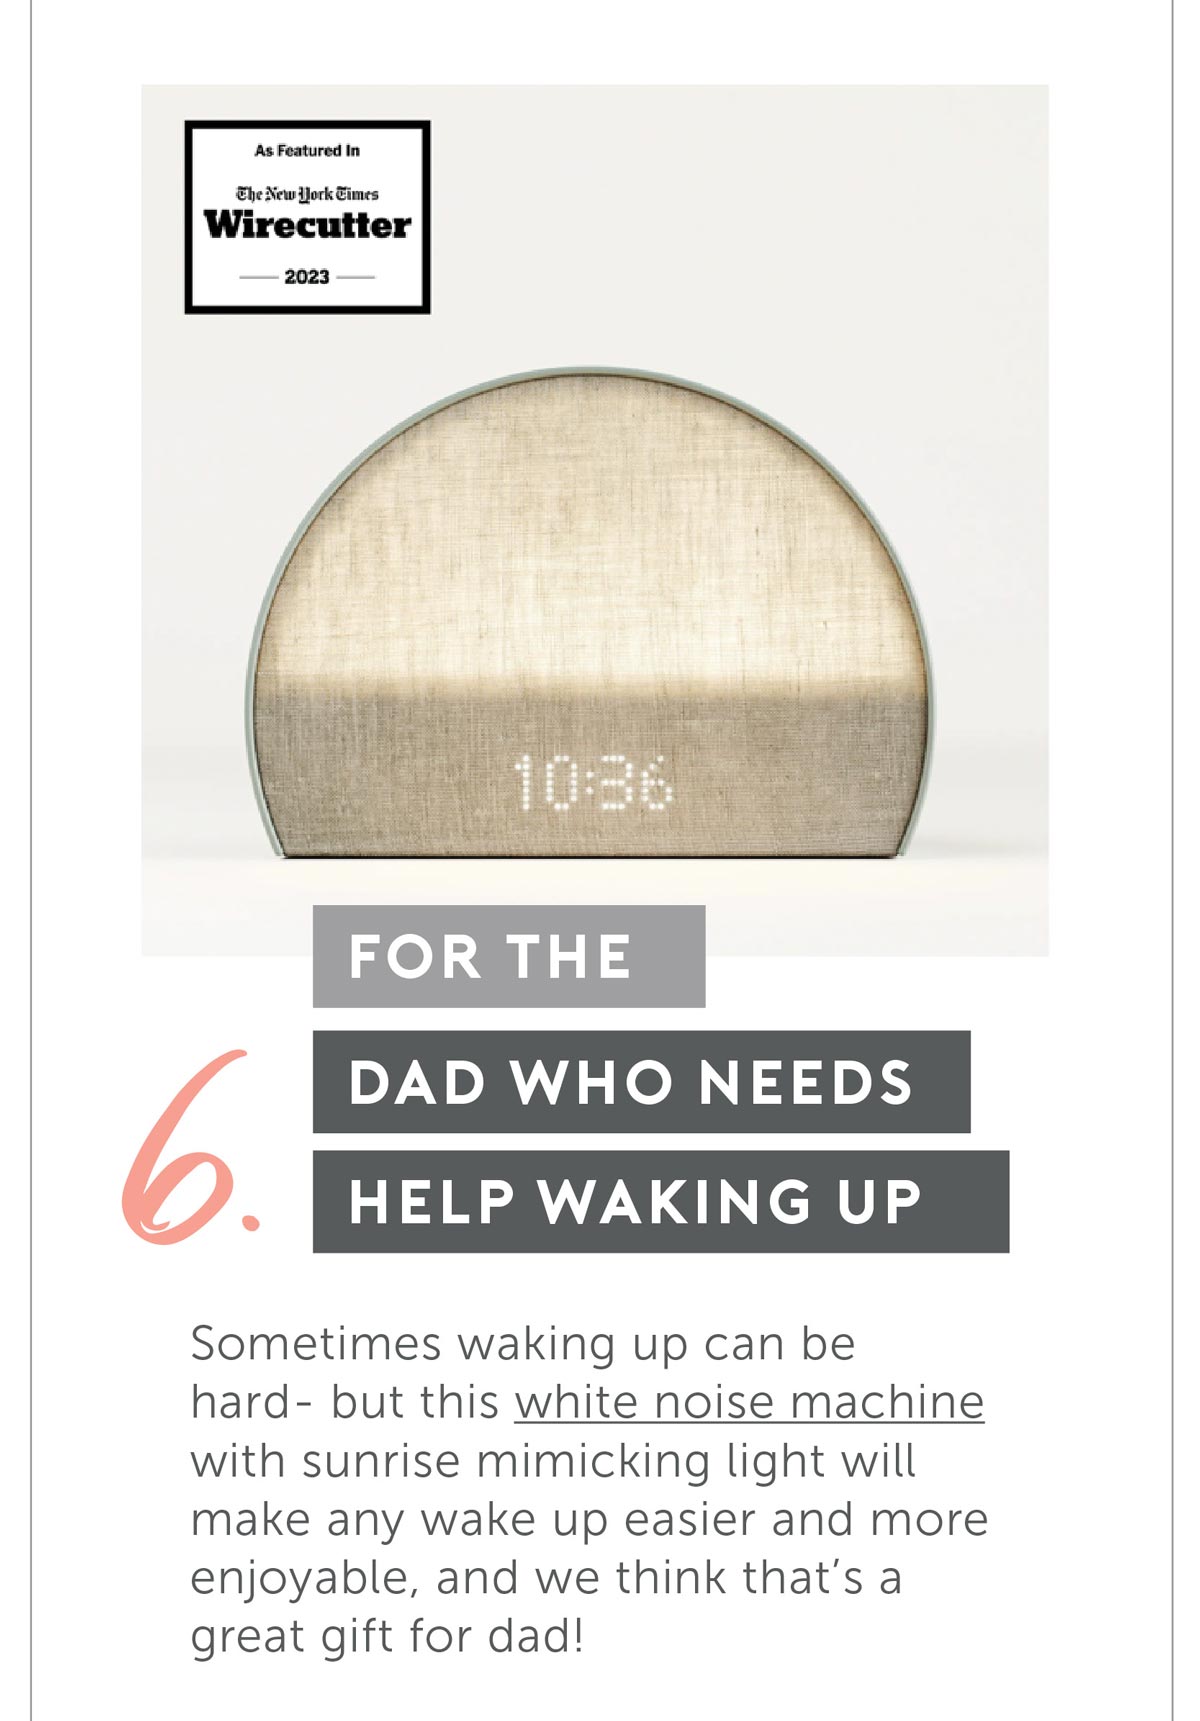 For The Dad Who Needs Help Waking Up. Sometimes waking up can be hard- but this white noise machine with sunrise mimicking light will make any wake up easier and more enjoyable, and we think that’s a great gift for dad!